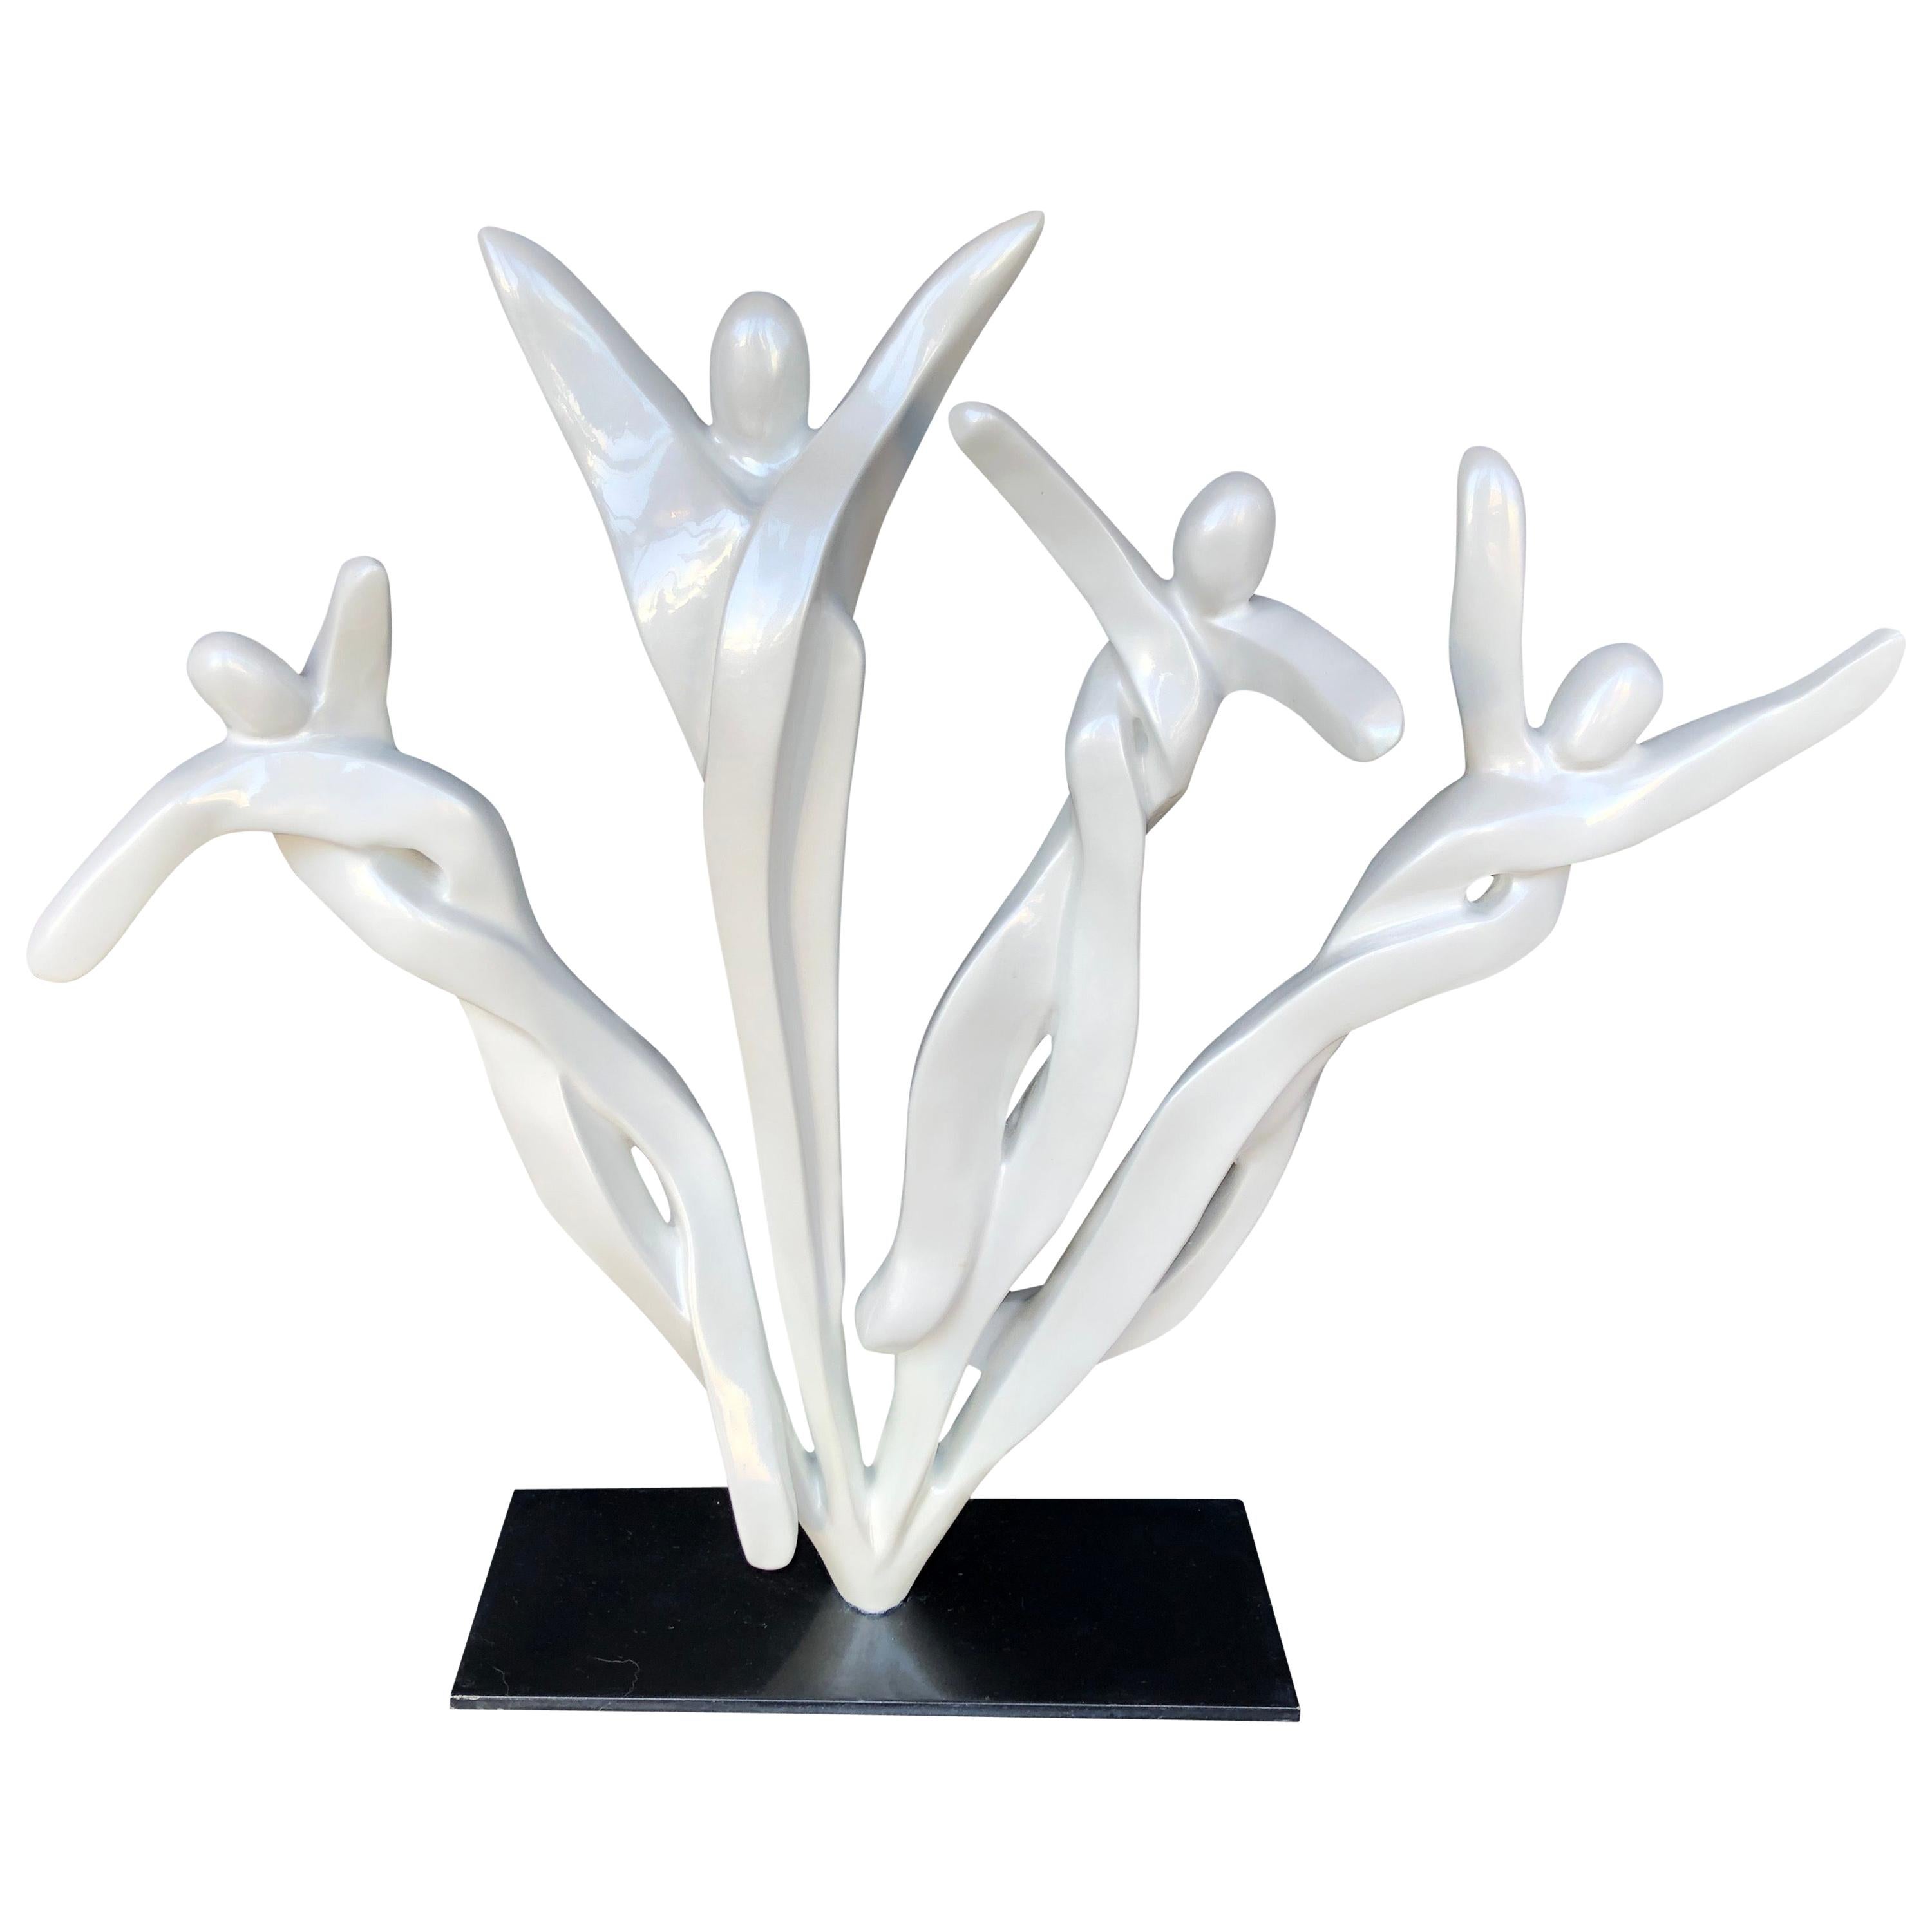 Sculpture of Dancers by Mauricio Sorice For Sale